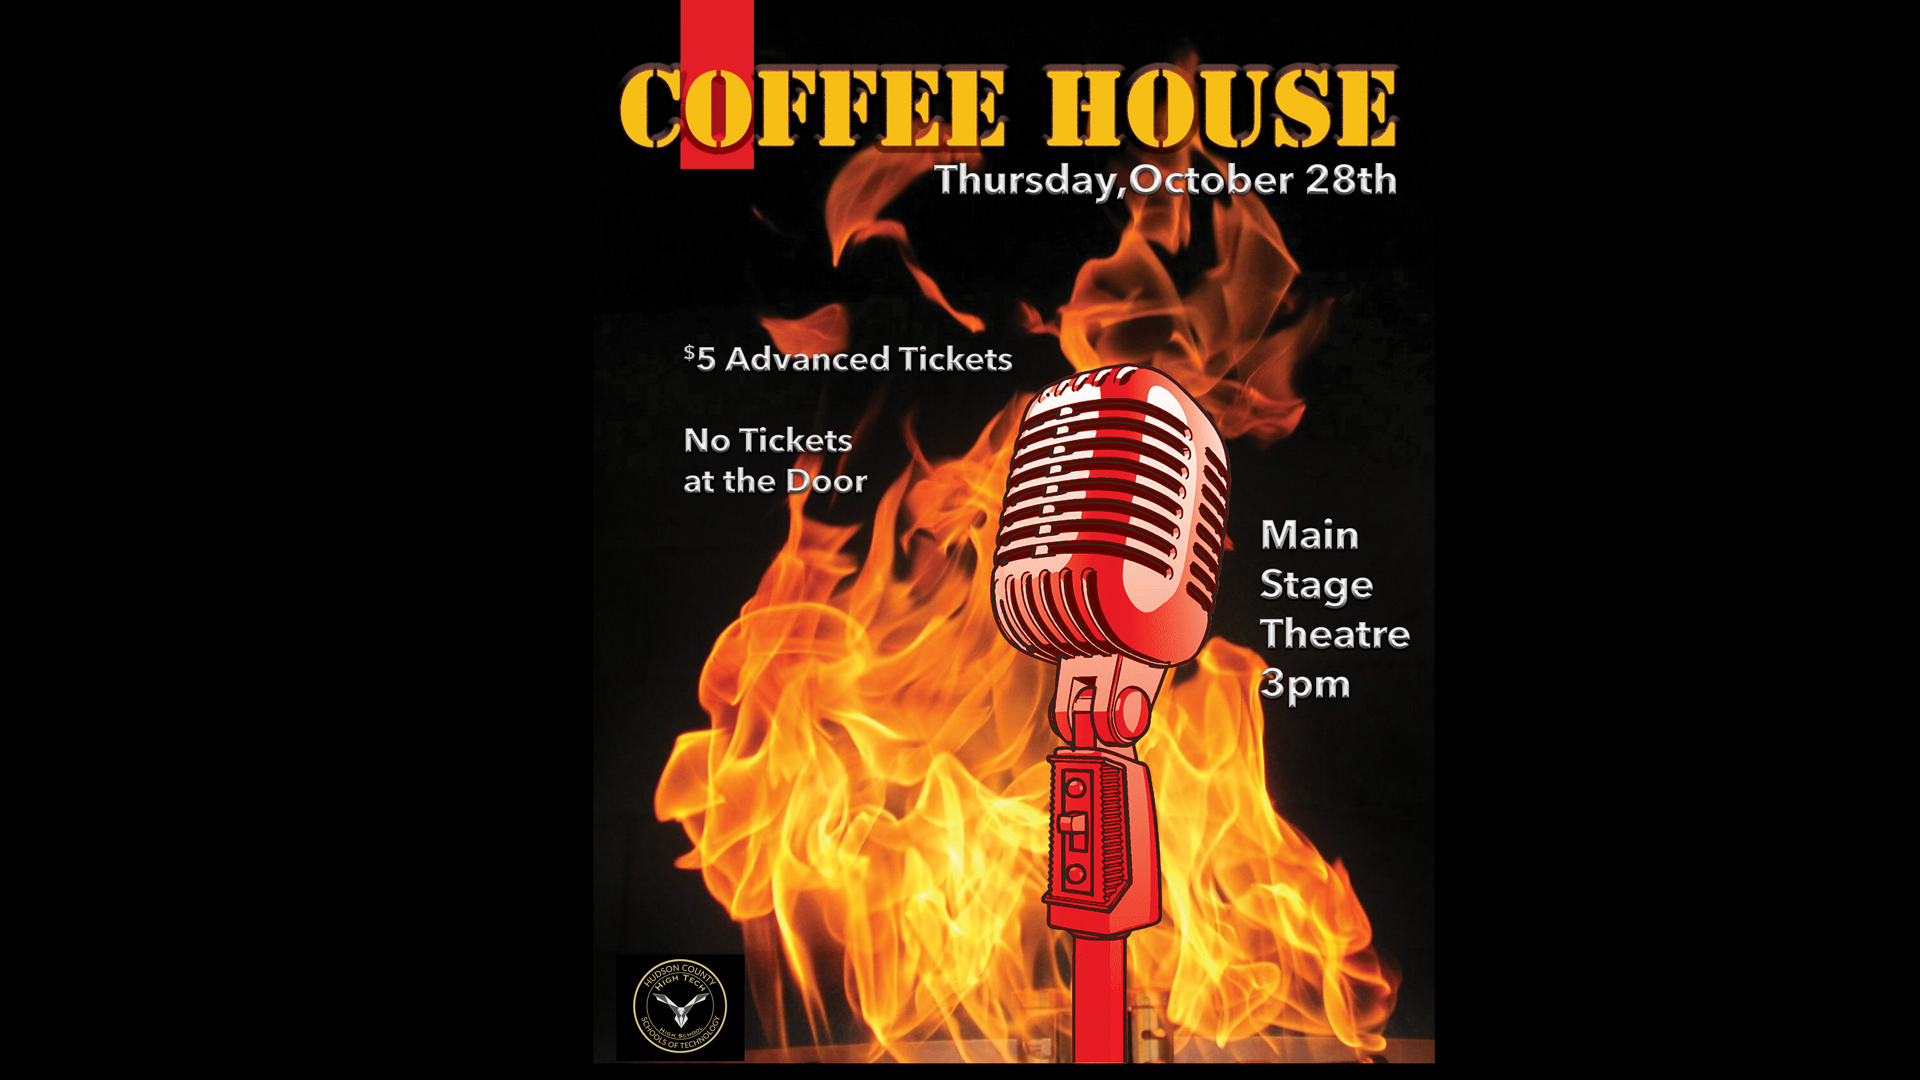 Back to School Coffeehouse